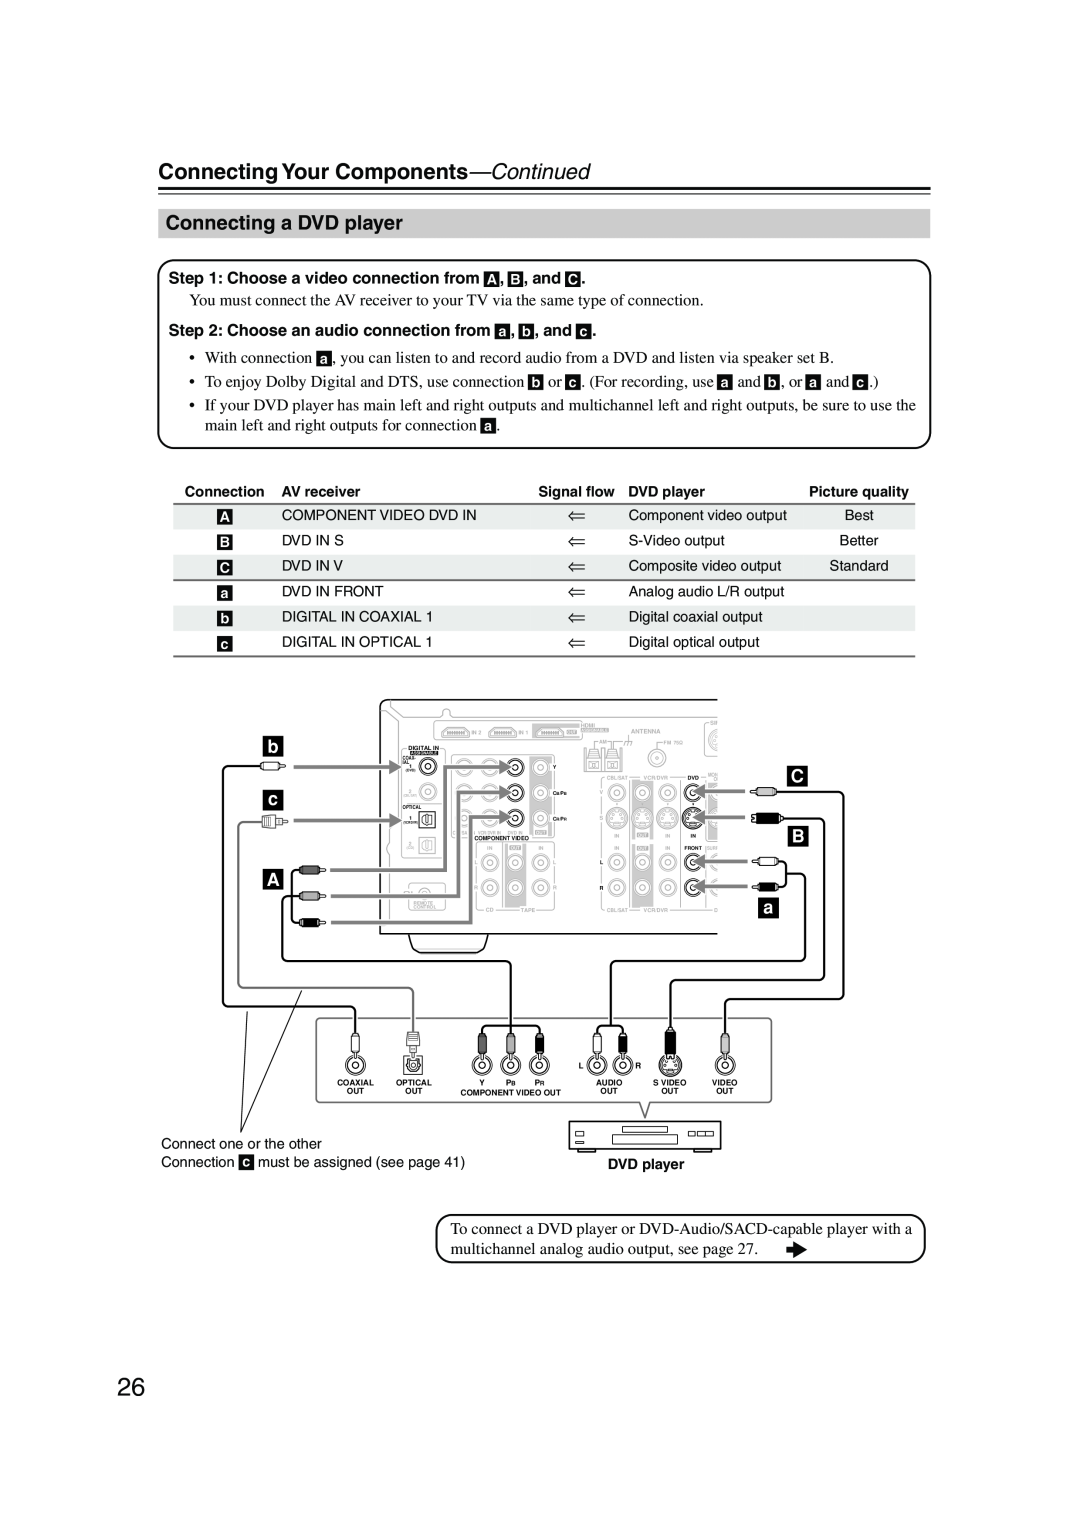 Onkyo HT-SP904 instruction manual Connecting a DVD player, Connecting Your Components—Continued 